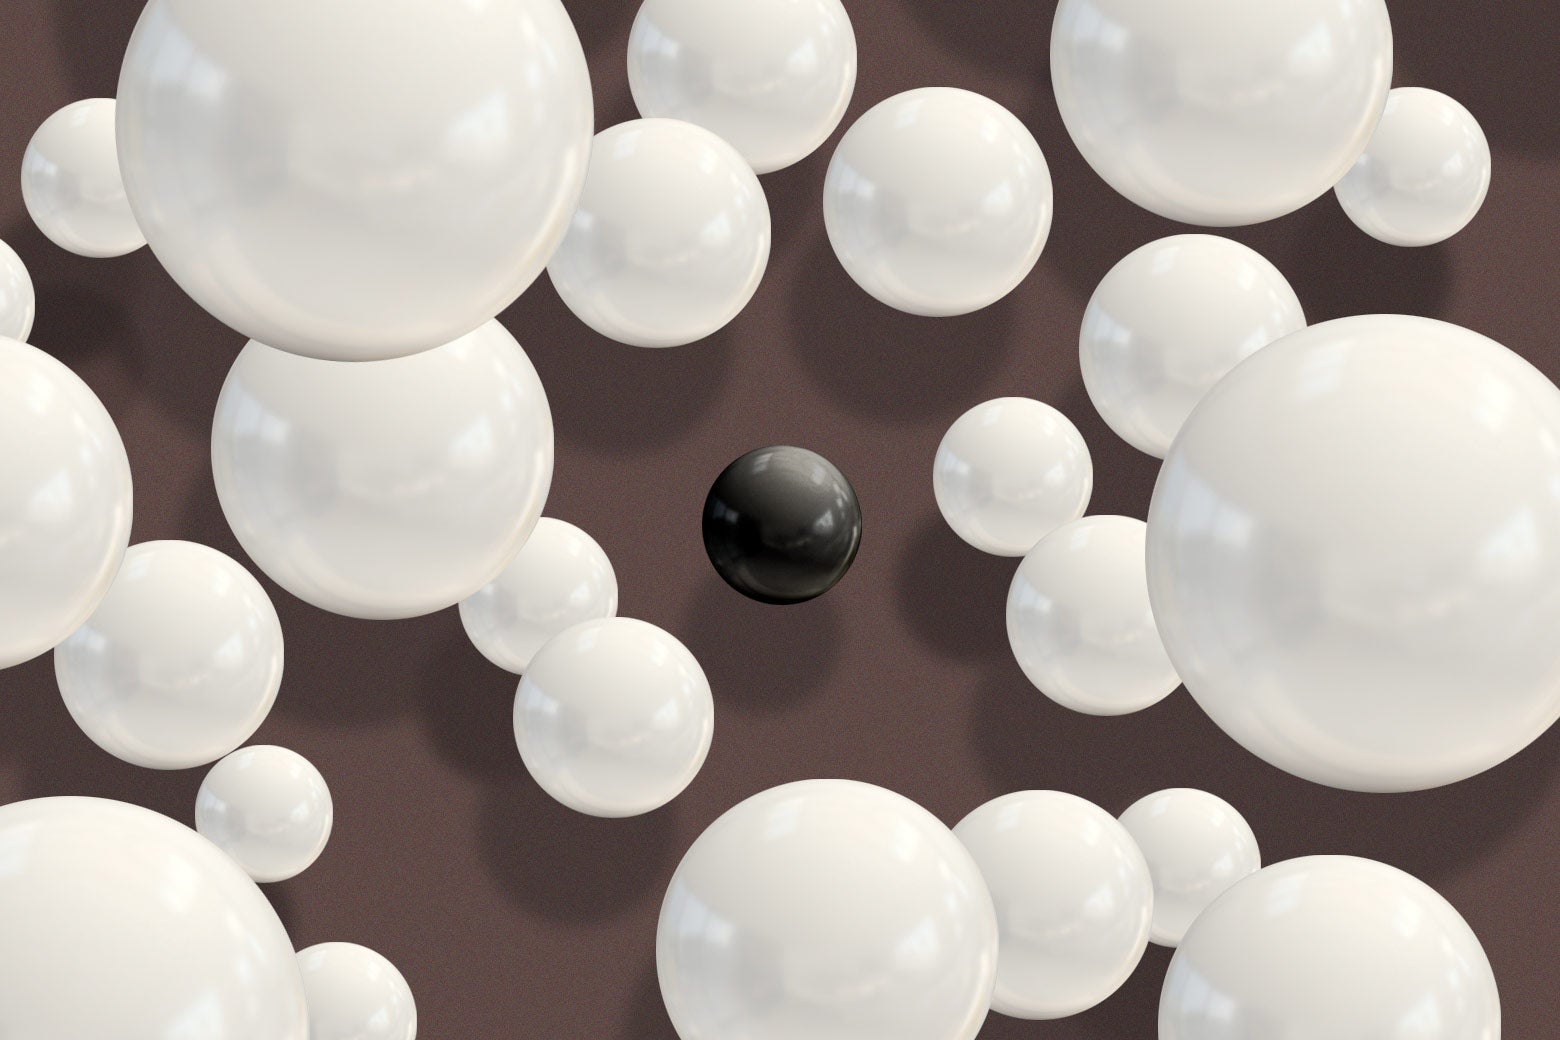 An illustration of several white marbles, and a single black marble at the center. 